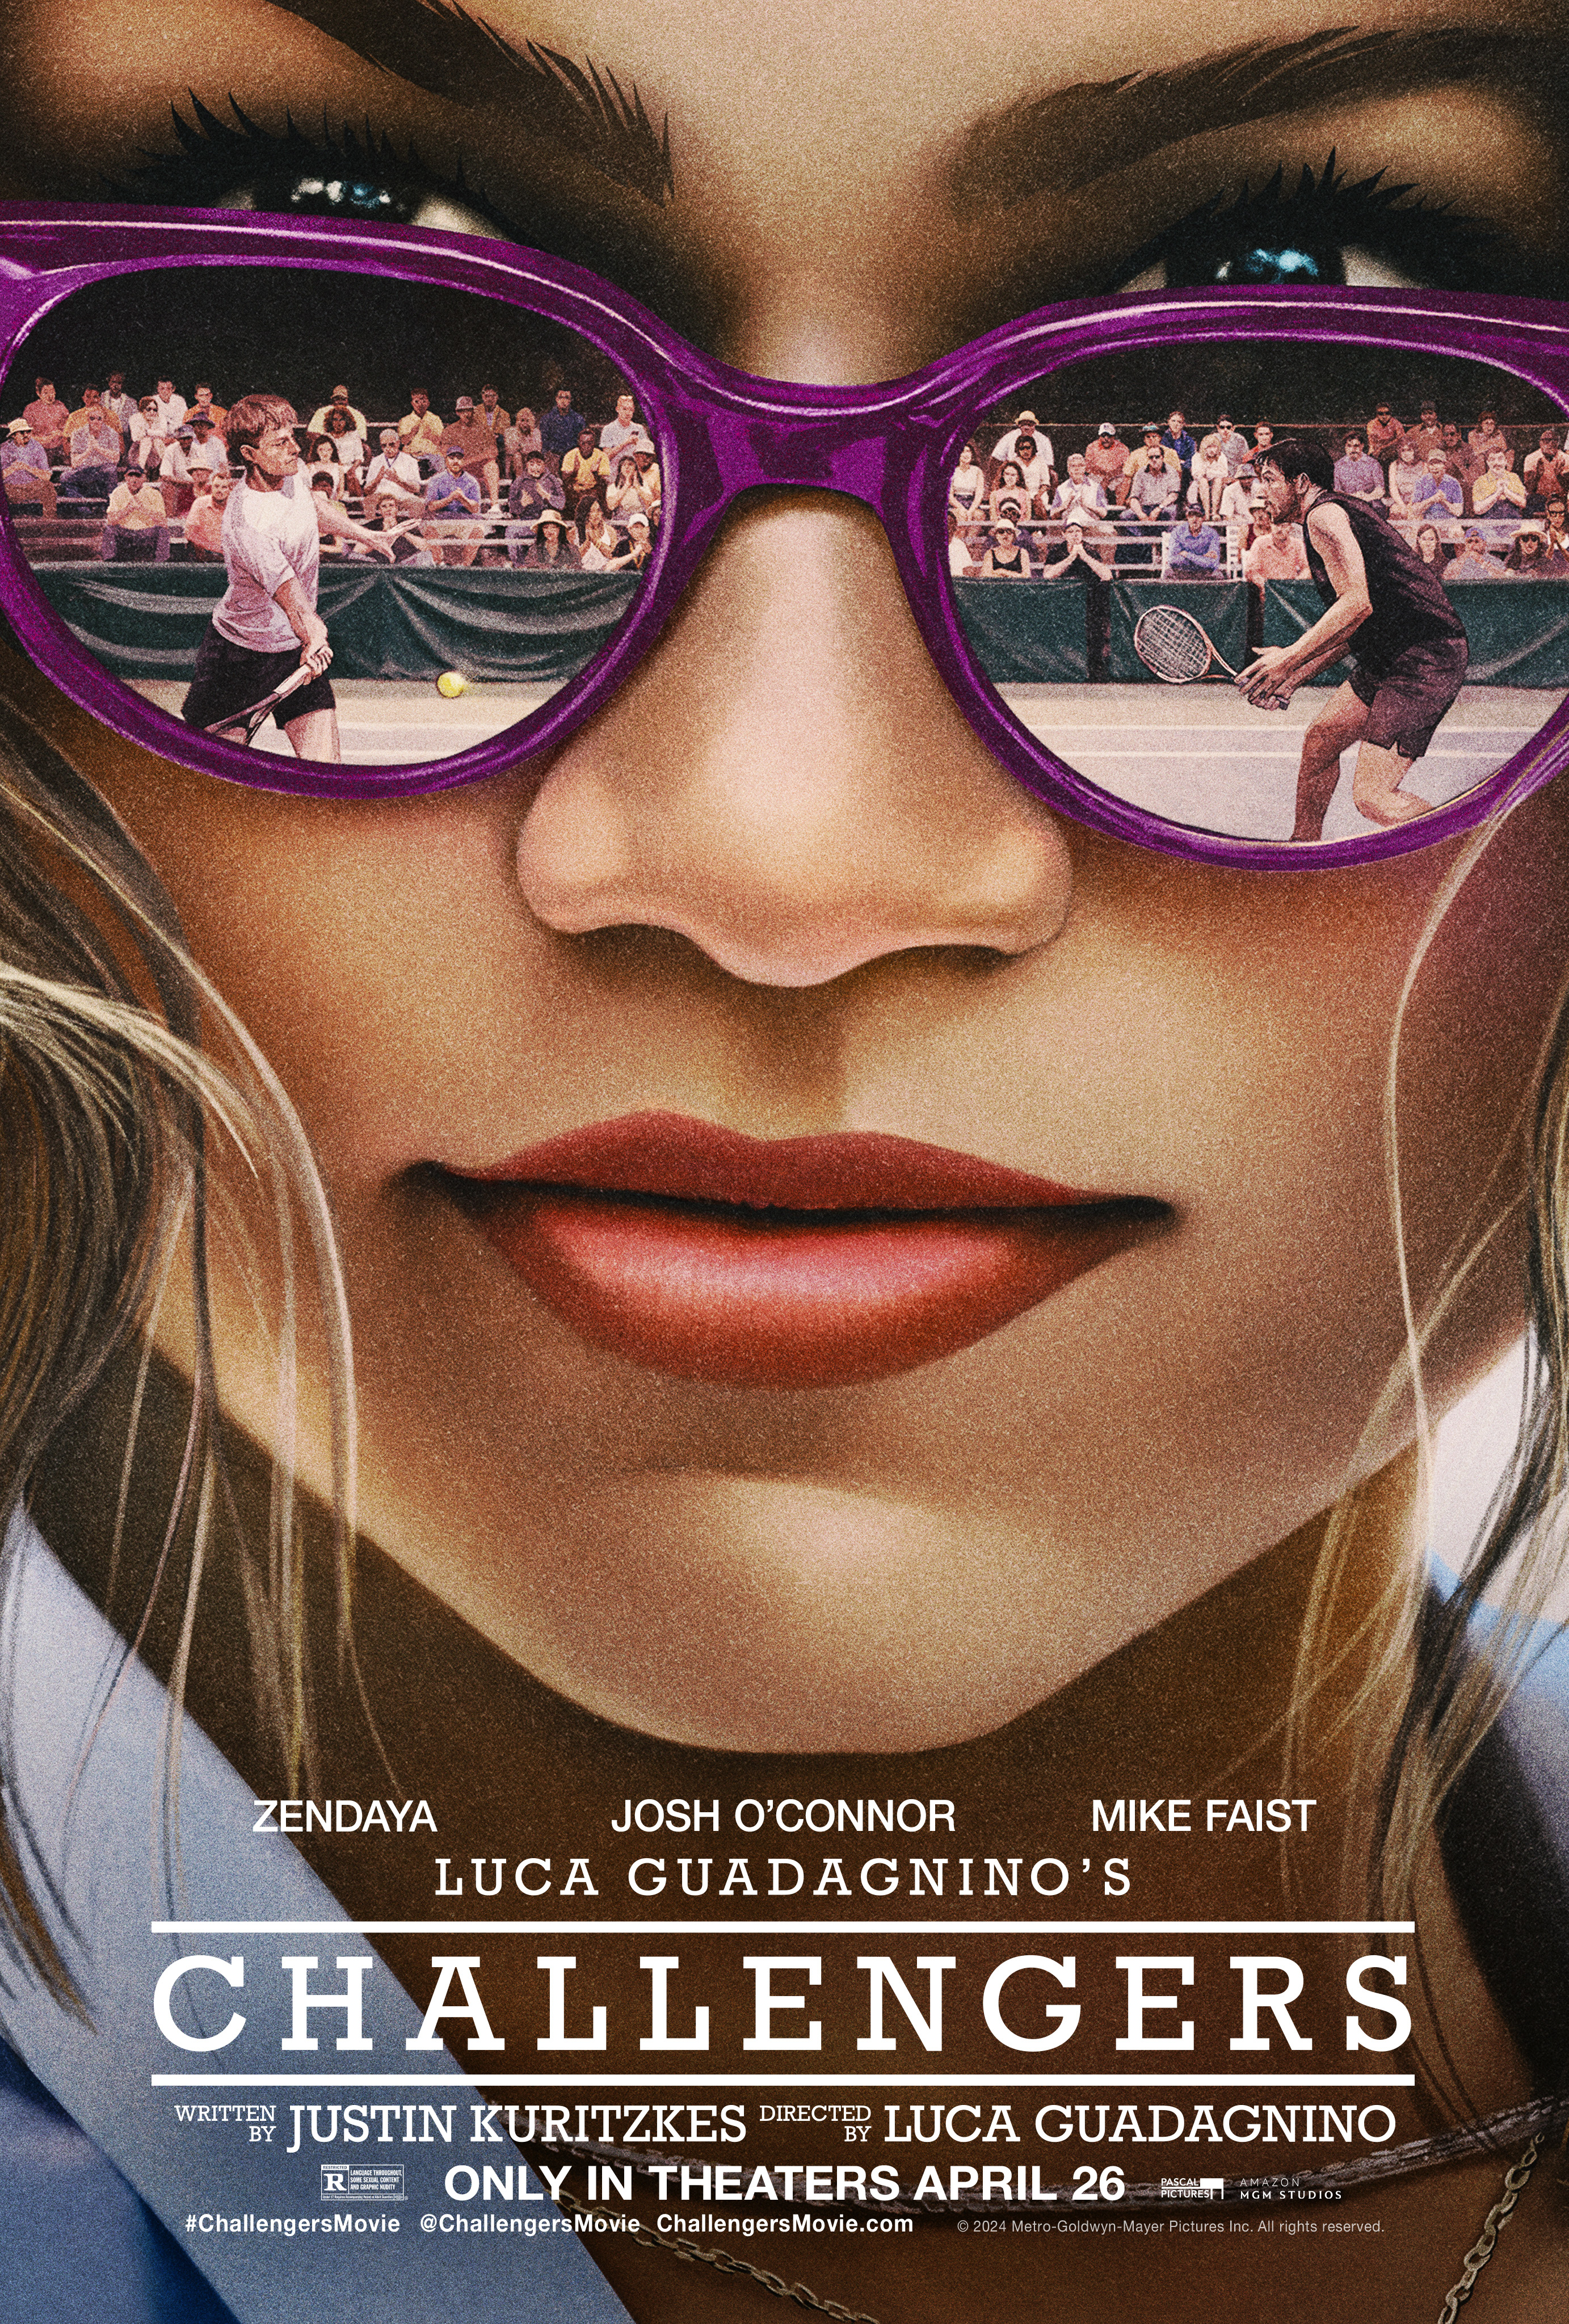 Movie poster for &quot;Challengers&quot; starring Zendaya, with close-up on sunglasses reflecting a tennis scene